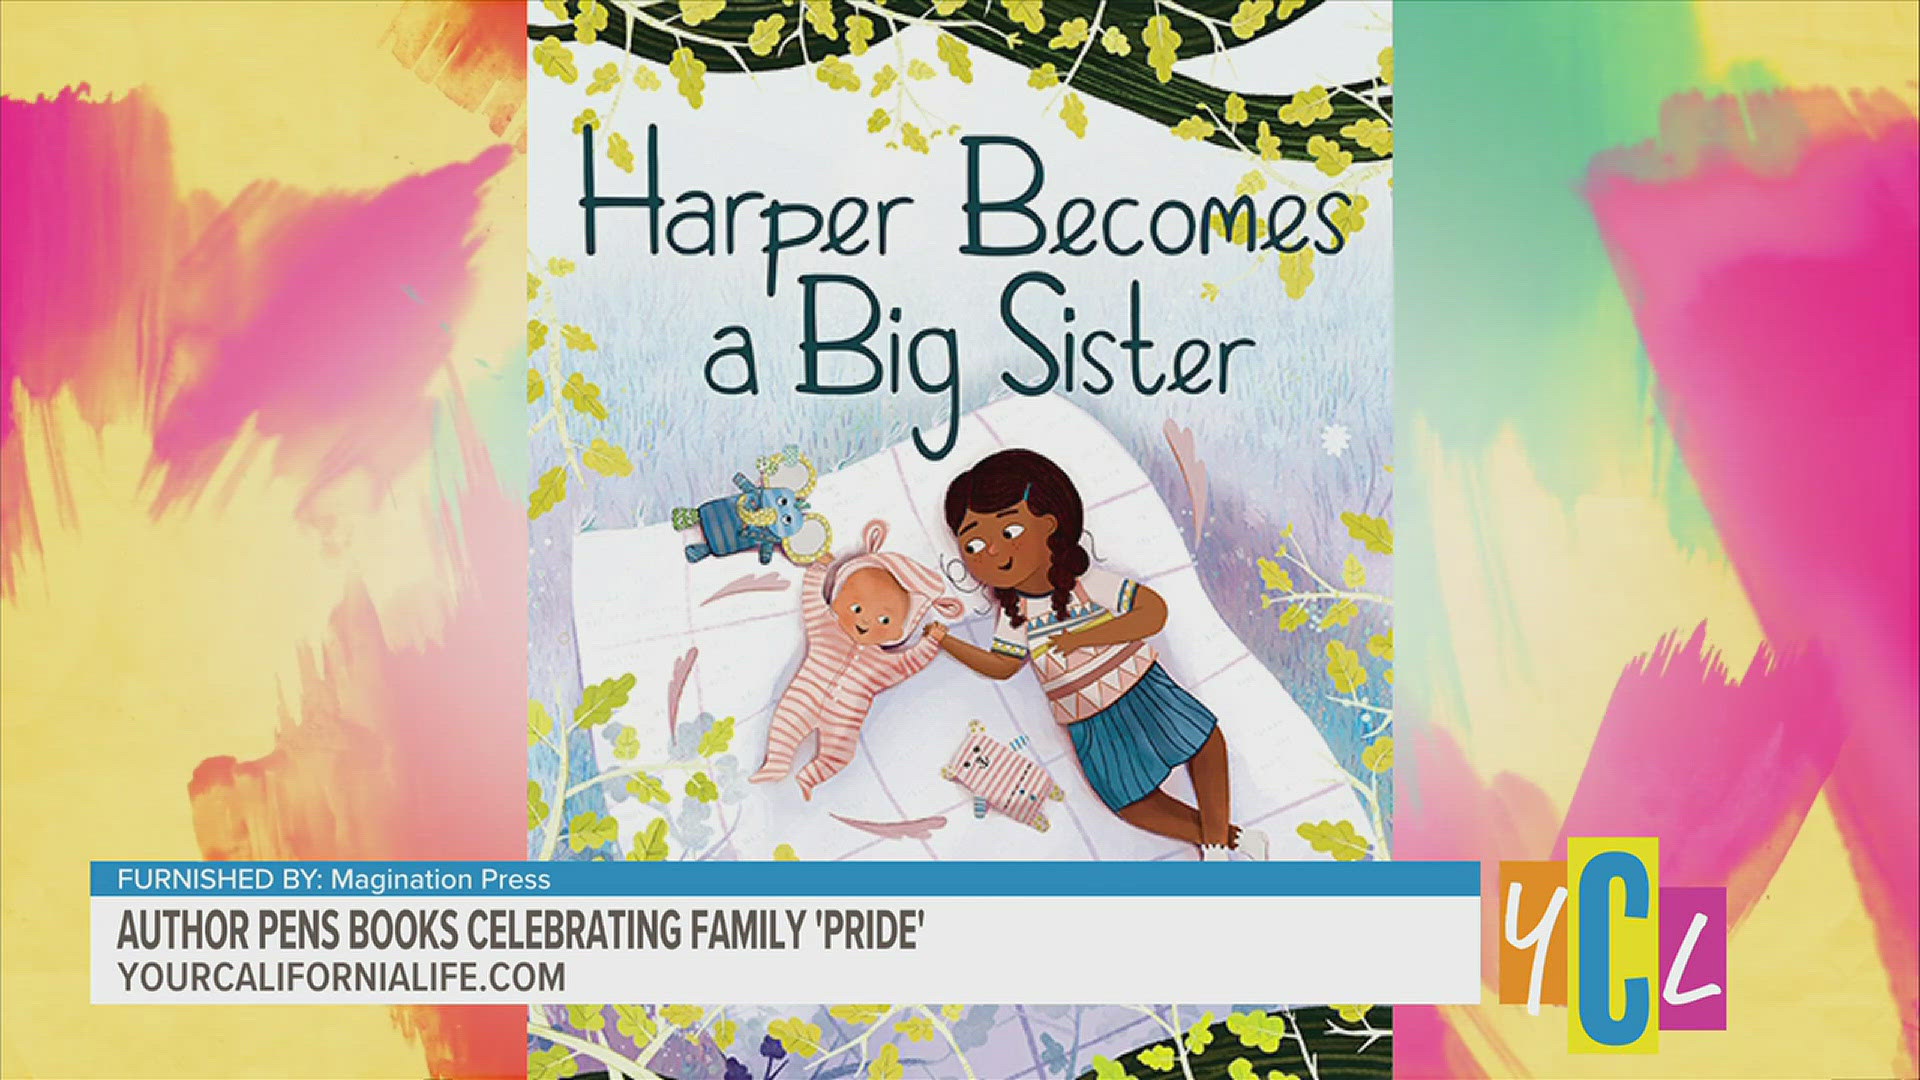 A new book for kids and families has been released just in time for Pride Month: "Harper Becomes a Big Sister." We chatted with the author, Seamus Kirst.